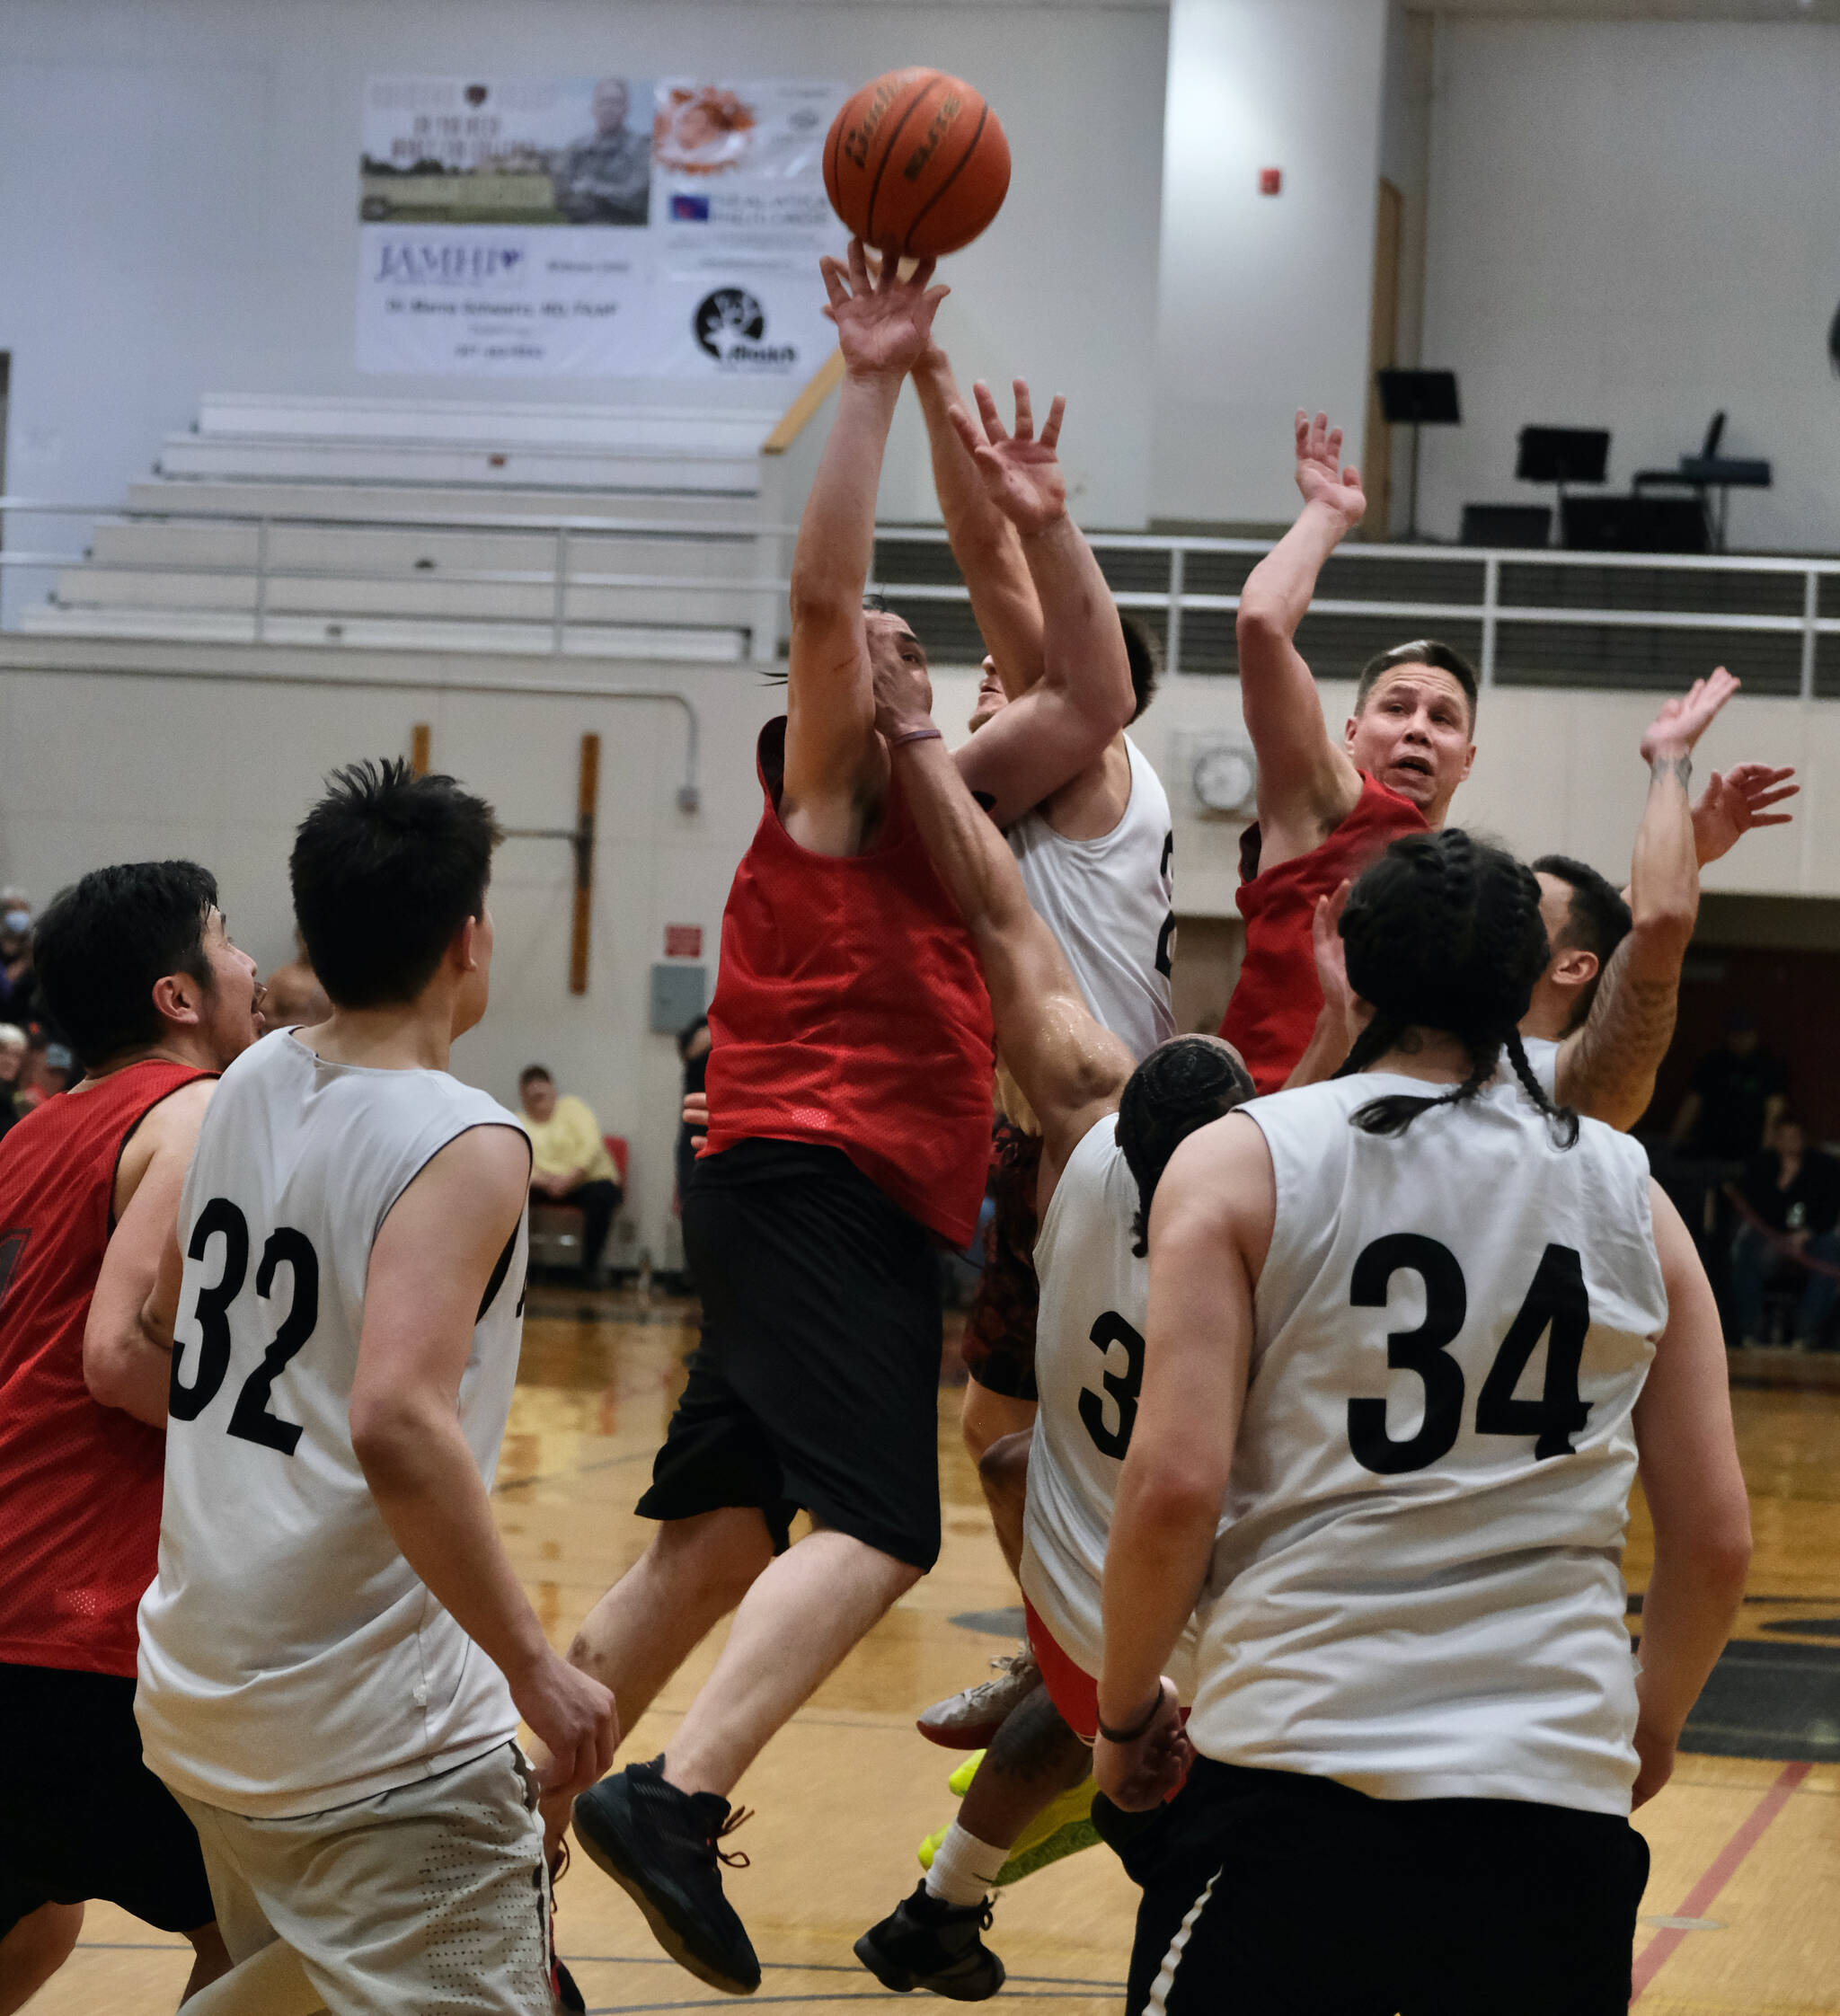 Hydaburg’s George Peratrovich tips in teammate Vinnie Edenshaw’s missed free throw with 0.3 seconds remaining in overtime, forching a second overtime in a win over Angoon during Friday night’s elimination game at the Gold Medal Tournament in Juneau. (Klas Stolpe/For the Juneau Empire)